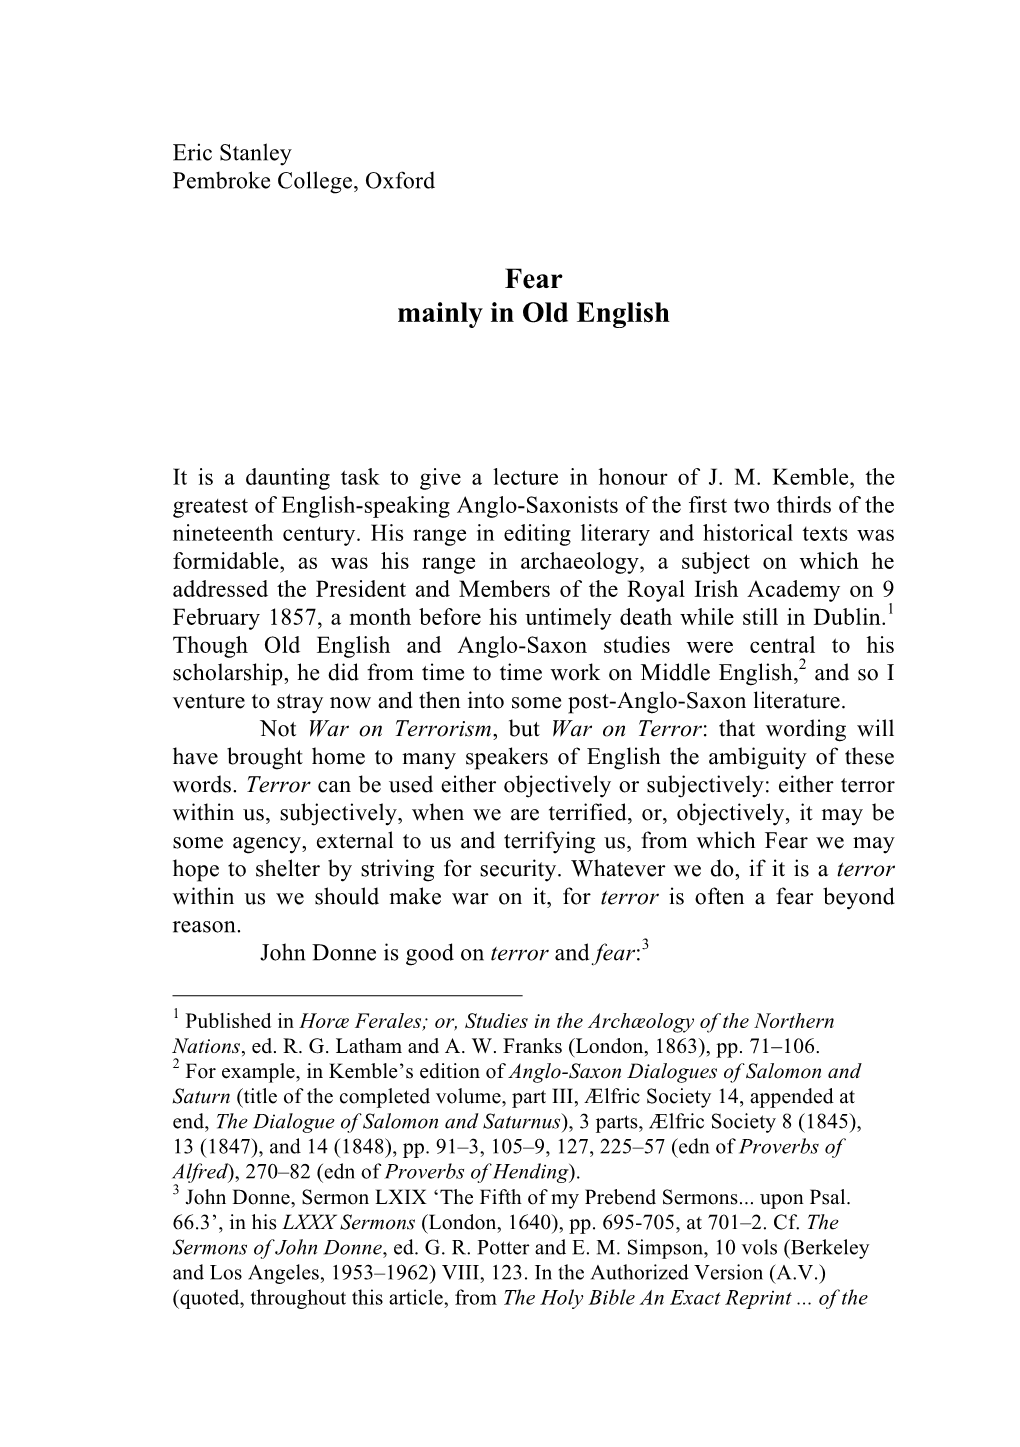 Fear, Mainly in Old English’, in the Kemble Lectures on Anglo-Saxon Studies 2005-8, Ed